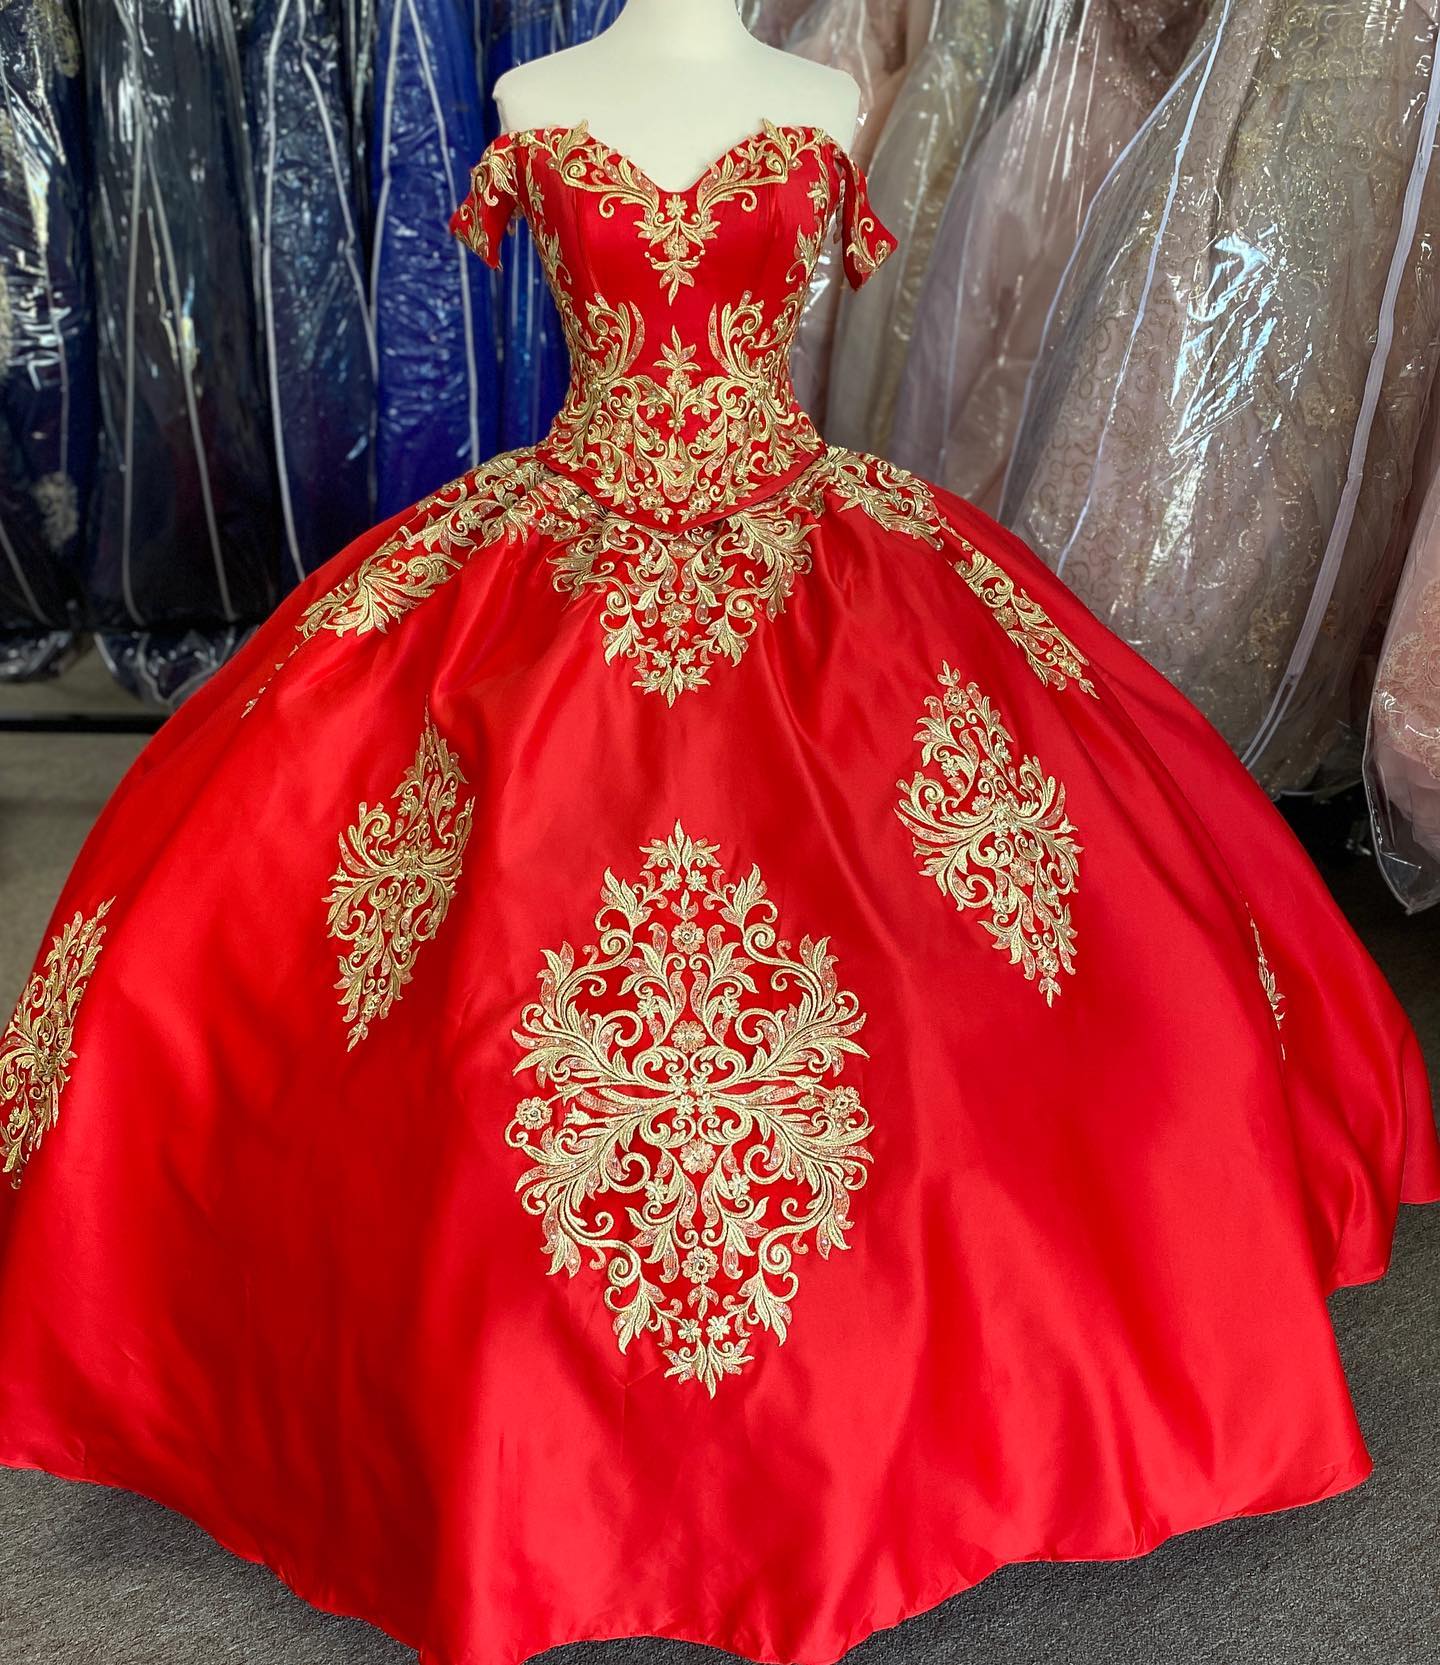 red and gold quinceanera dress,red quinceanera with gold embroidery,quinceanera mall 2 piece dress,2 piece detachable skirt quinceanera dress,red modern quinceanera dress,red sweet 16 dress,red quinceanera dress,chinese quinceanera dress factory,quinceanera dress satin layers,